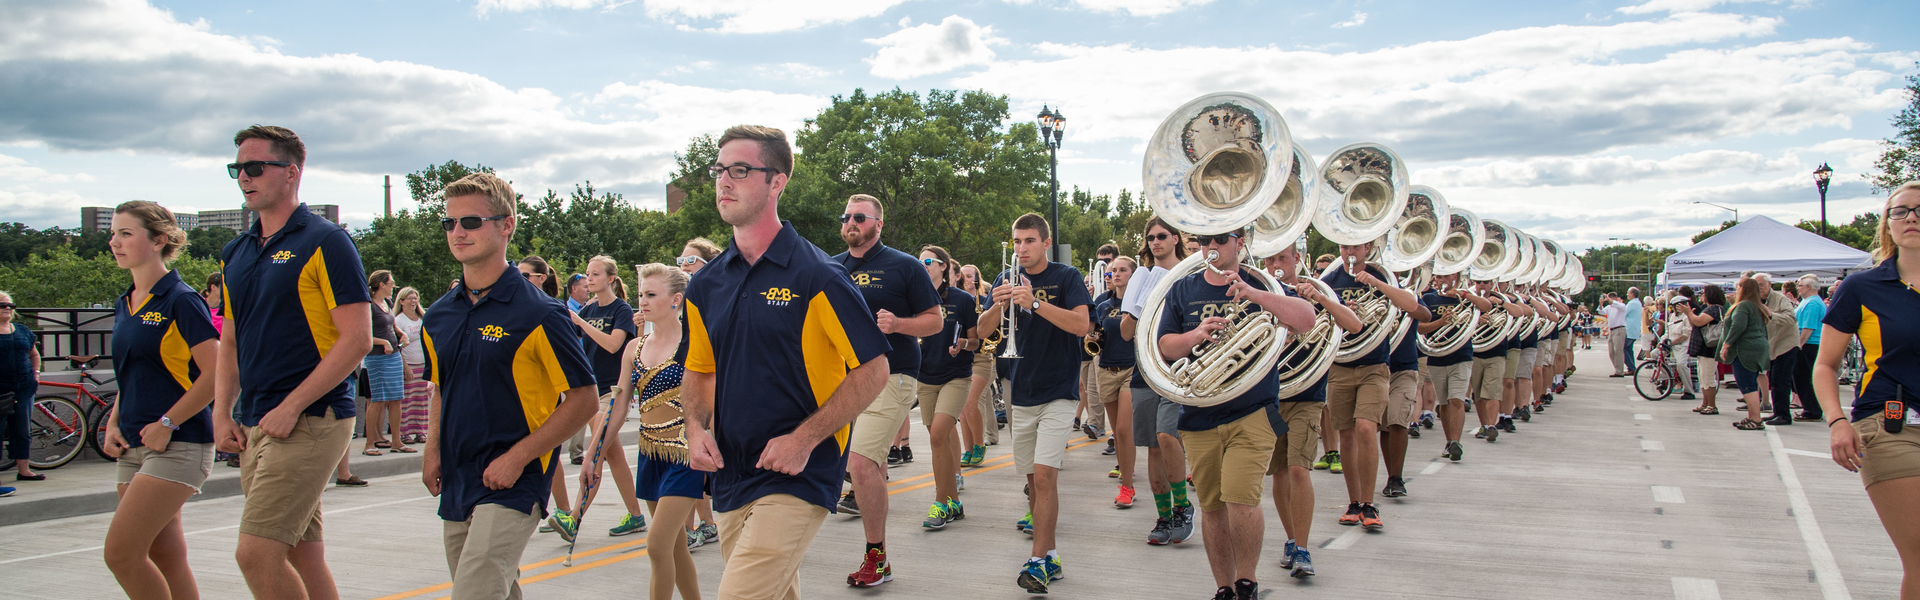 BMB performs for the Water Street bridge opening in 2016